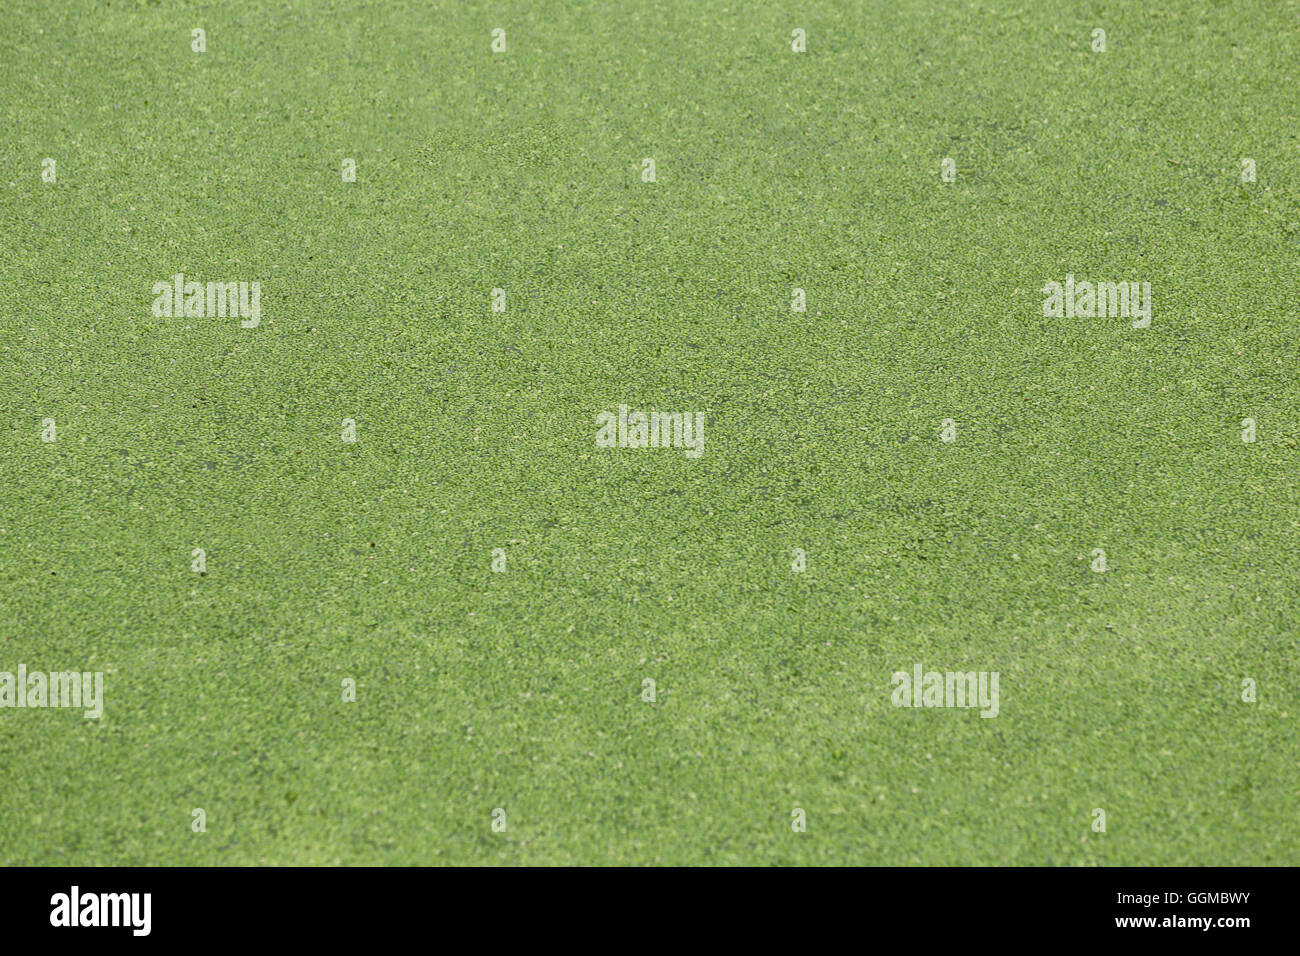 green lawn in the public garden for the nature background. Stock Photo